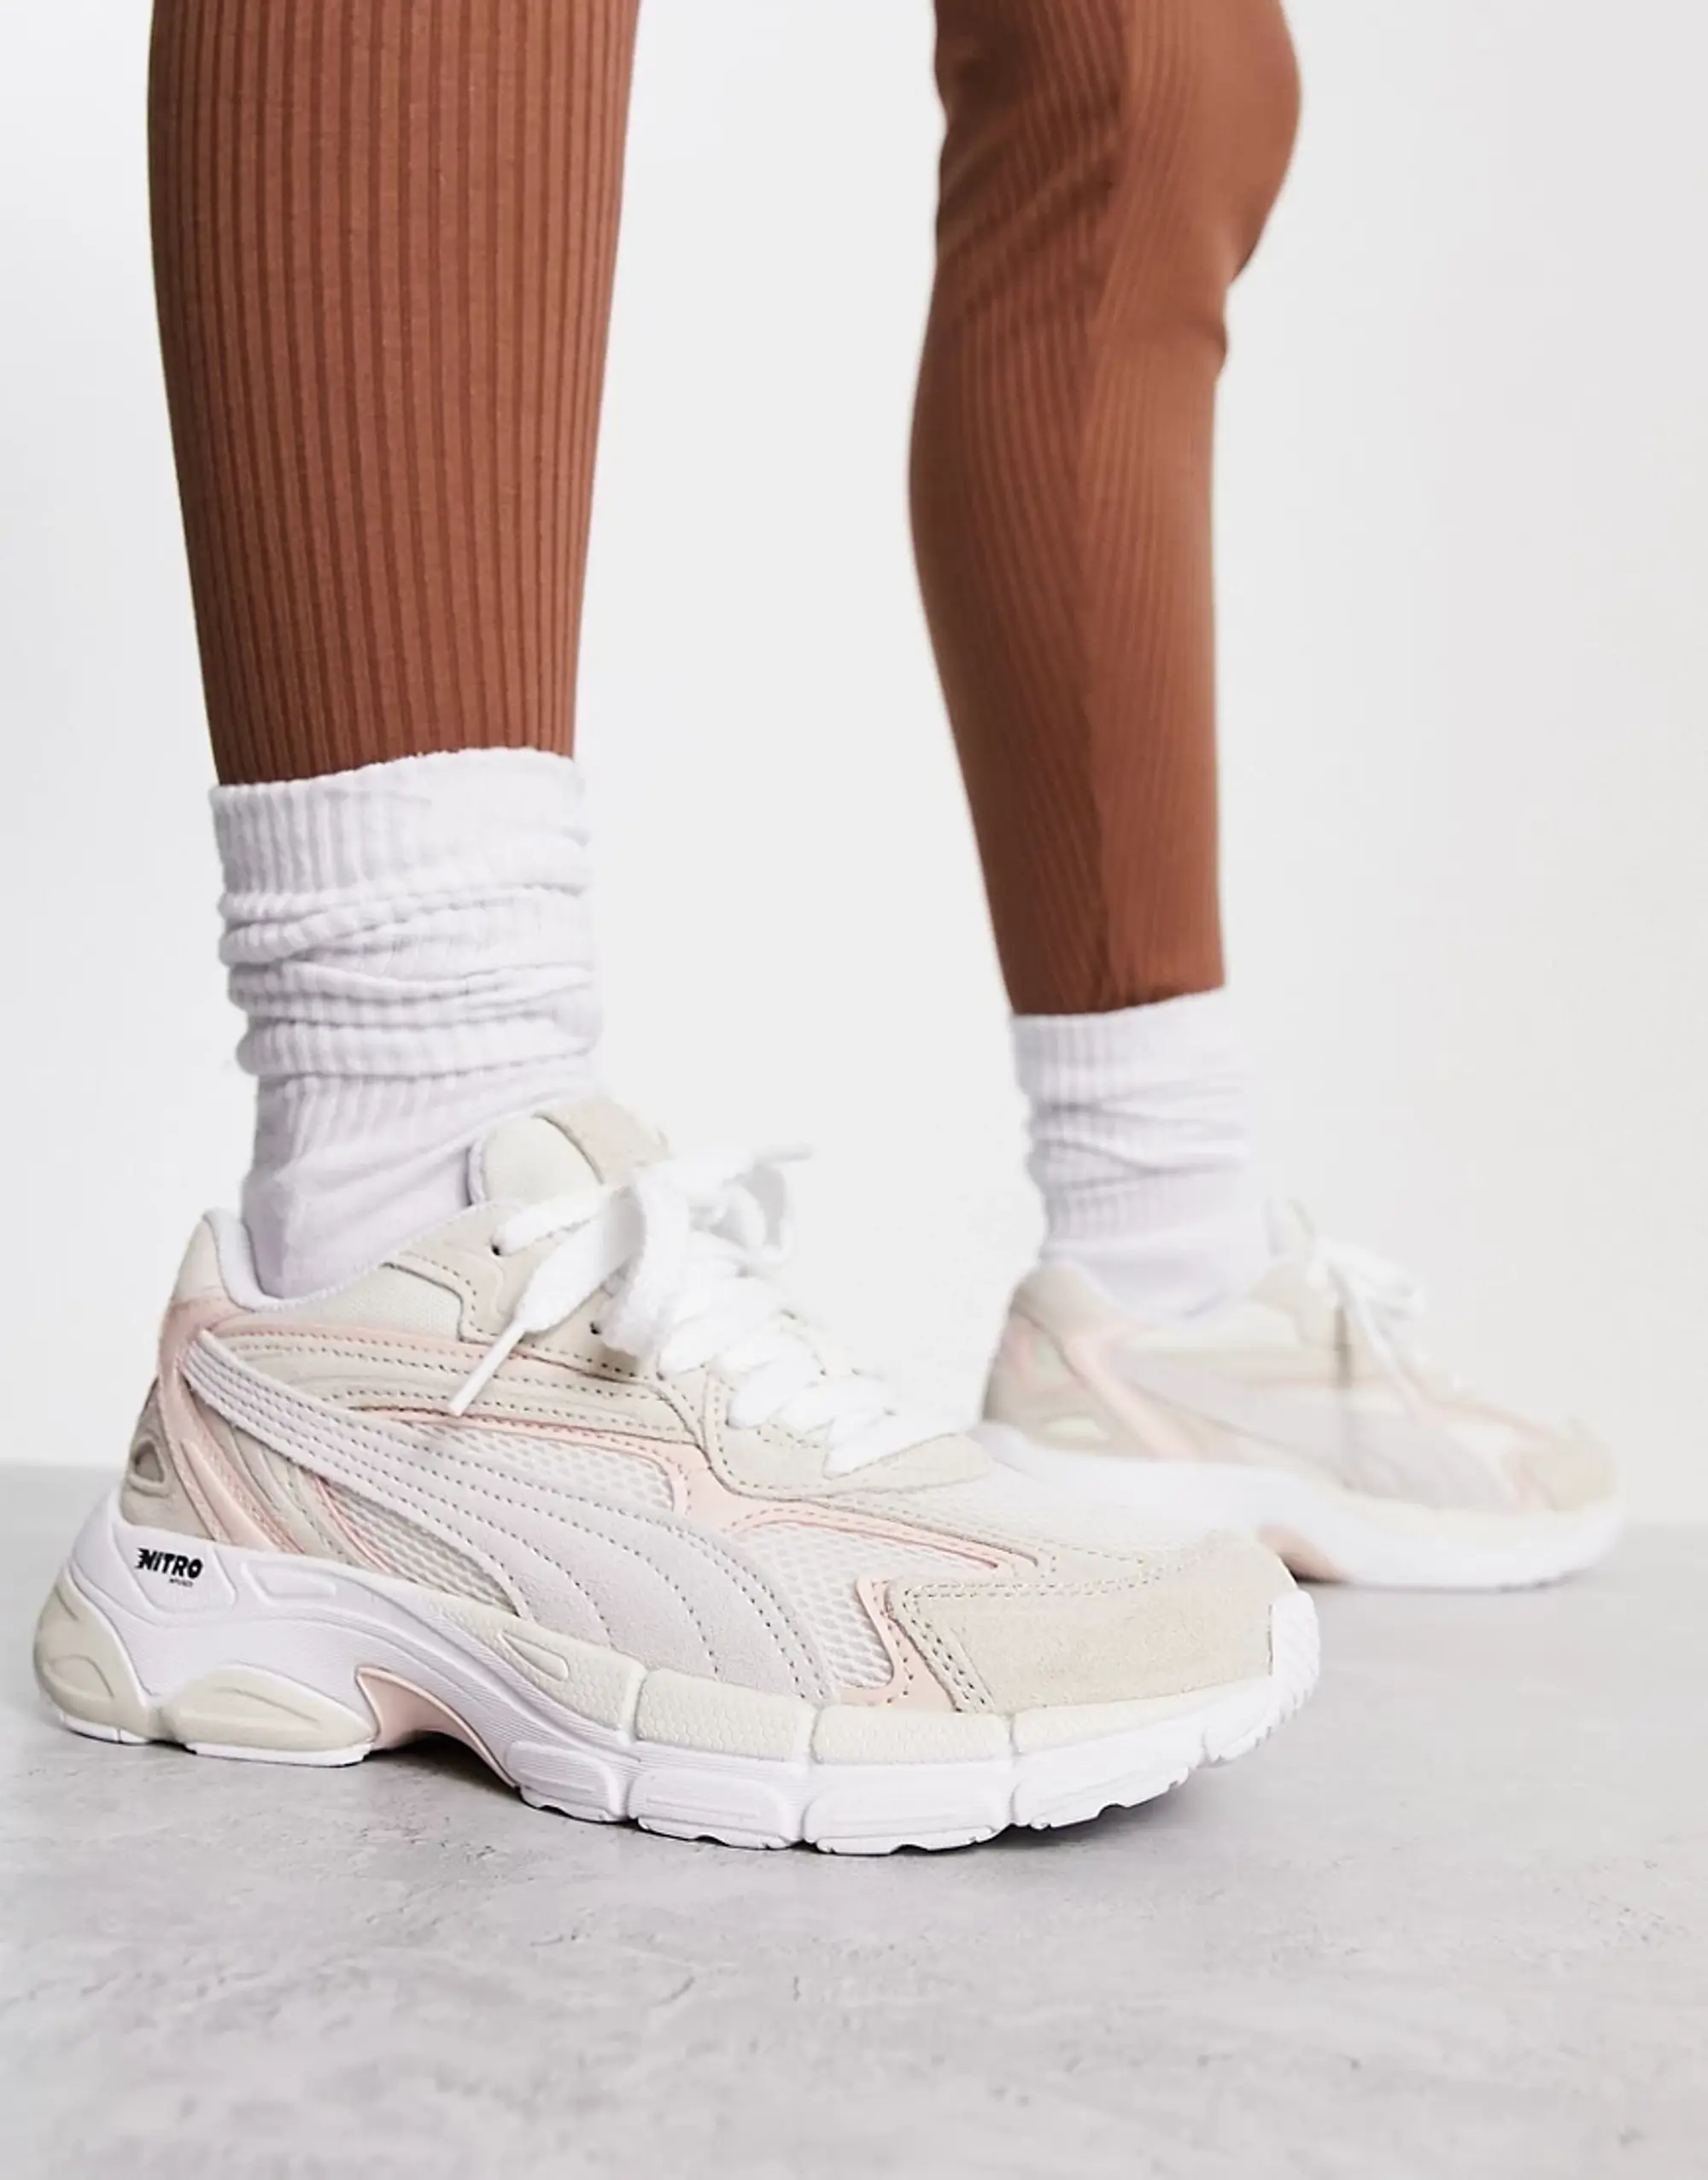 Puma Teveris Nitro Trainers In Off White And Pink